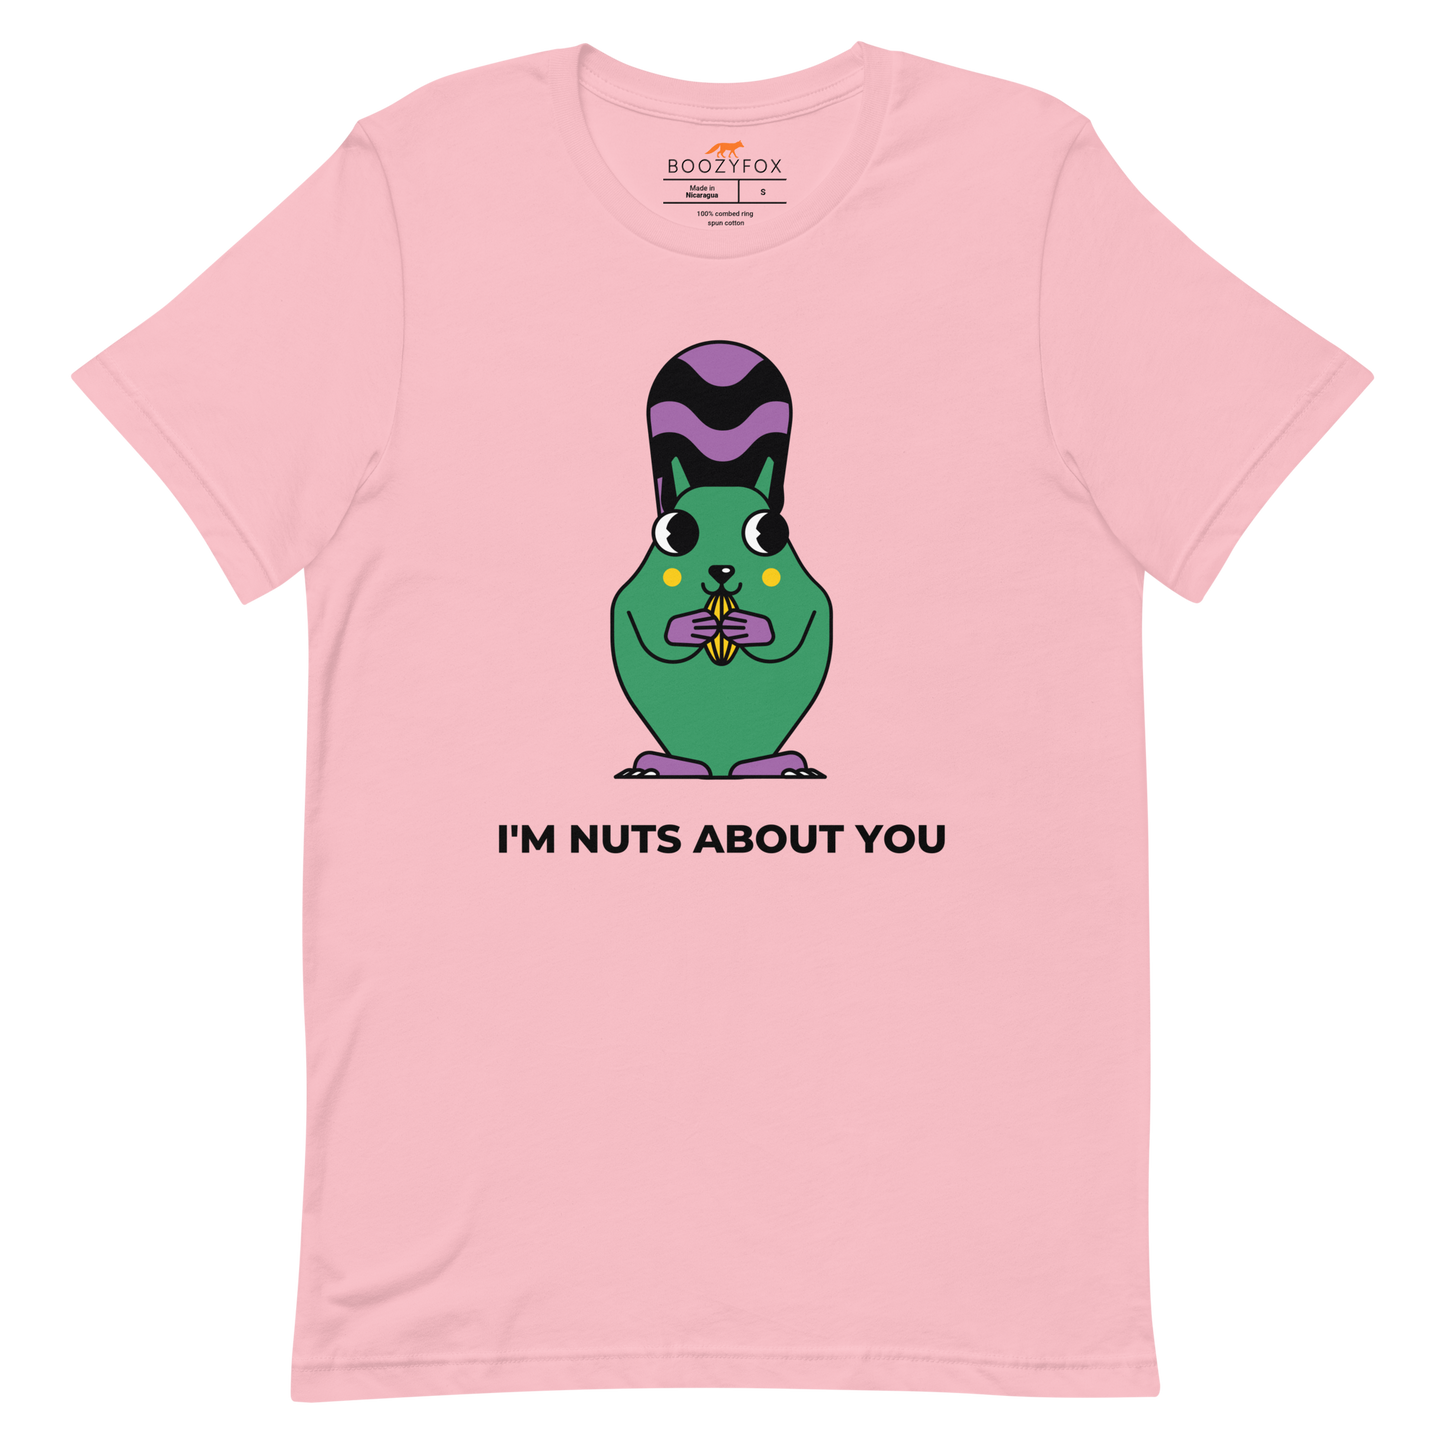 Pink Premium Squirrel T-Shirt featuring an I'm Nuts About You graphic on the chest - Funny Graphic Squirrel Tees - Boozy Fox